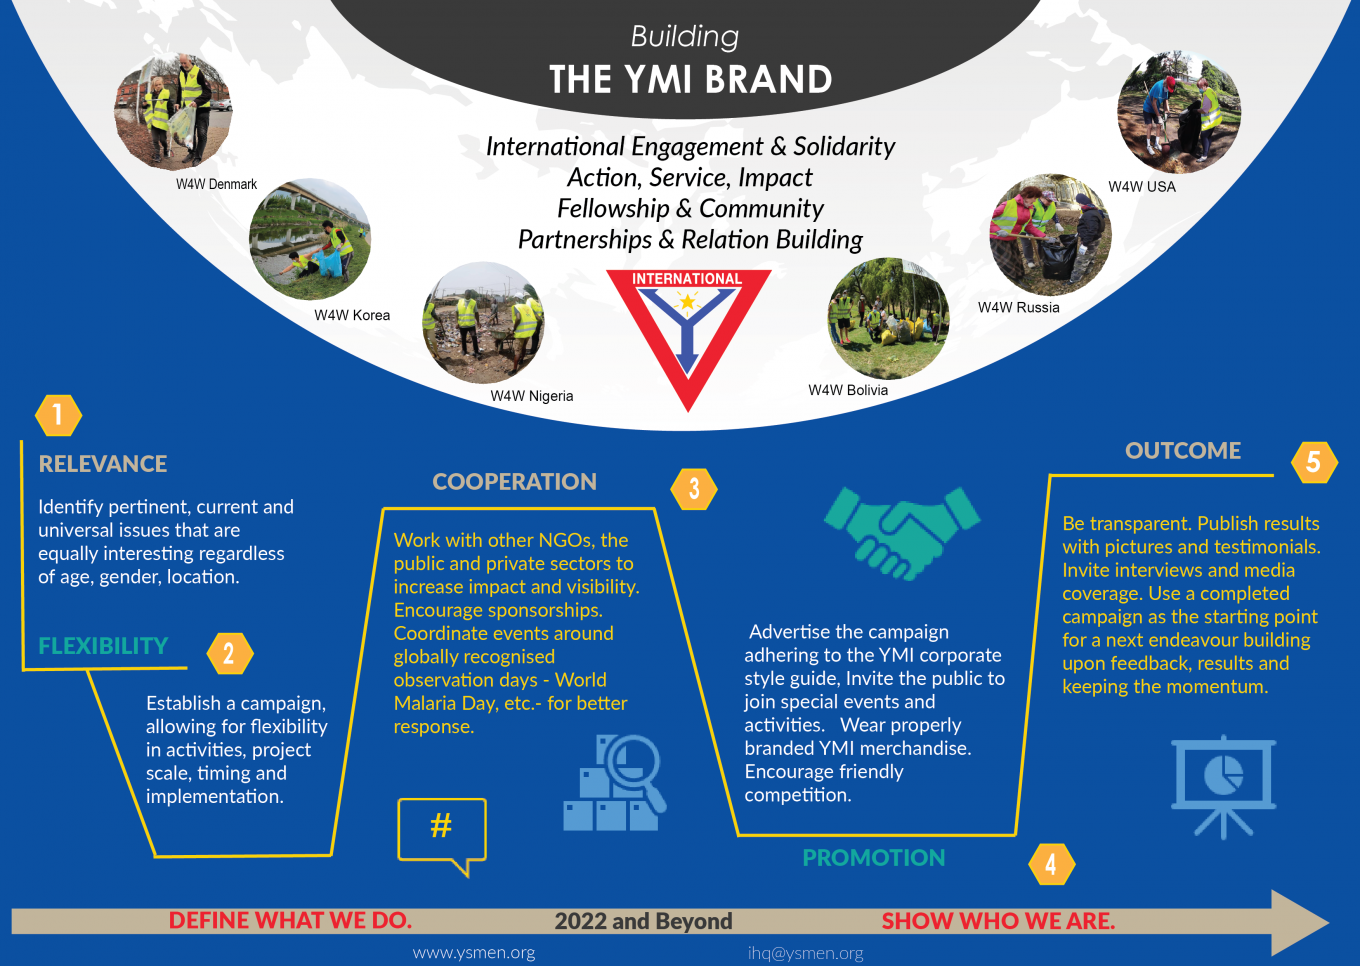 May Focus – Shaping the Future of YMI